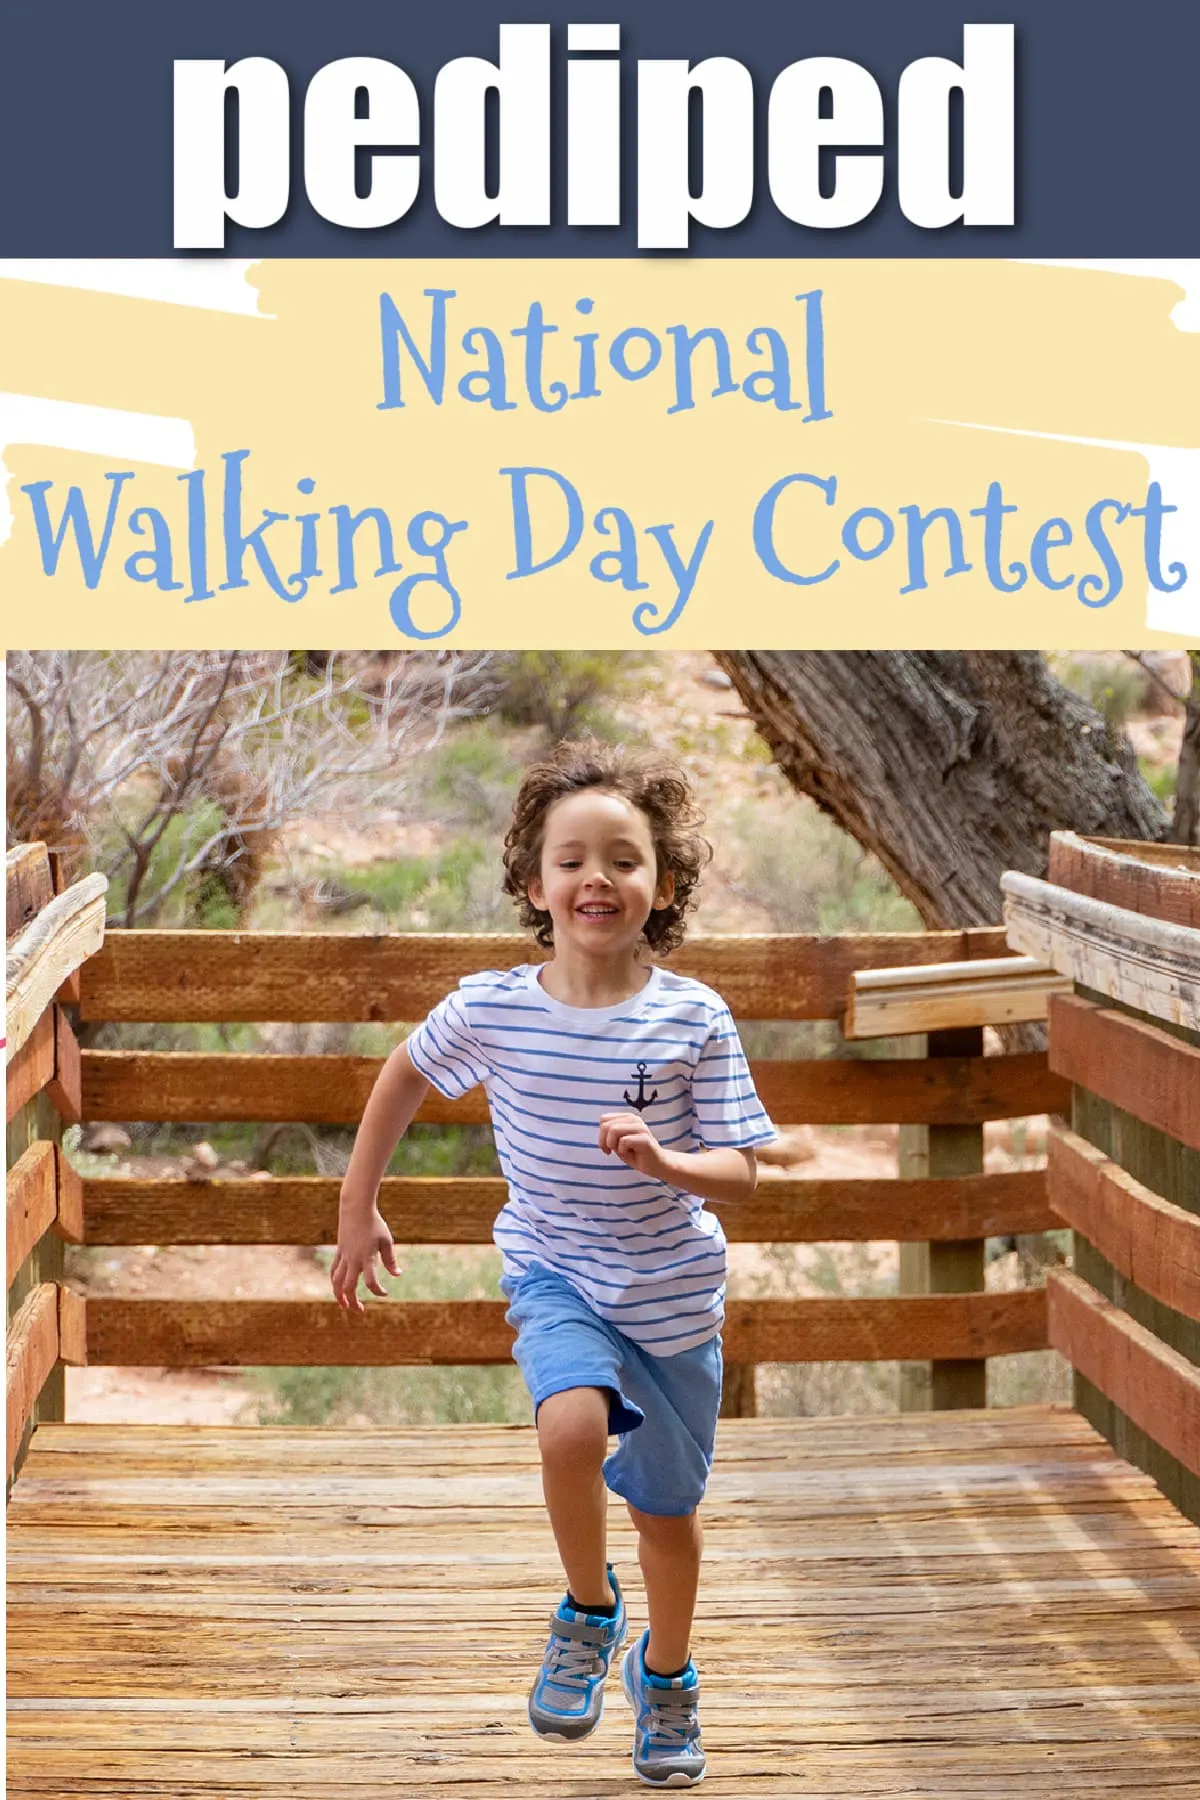 pediped National Walking Day Contest (+ Giveaway)